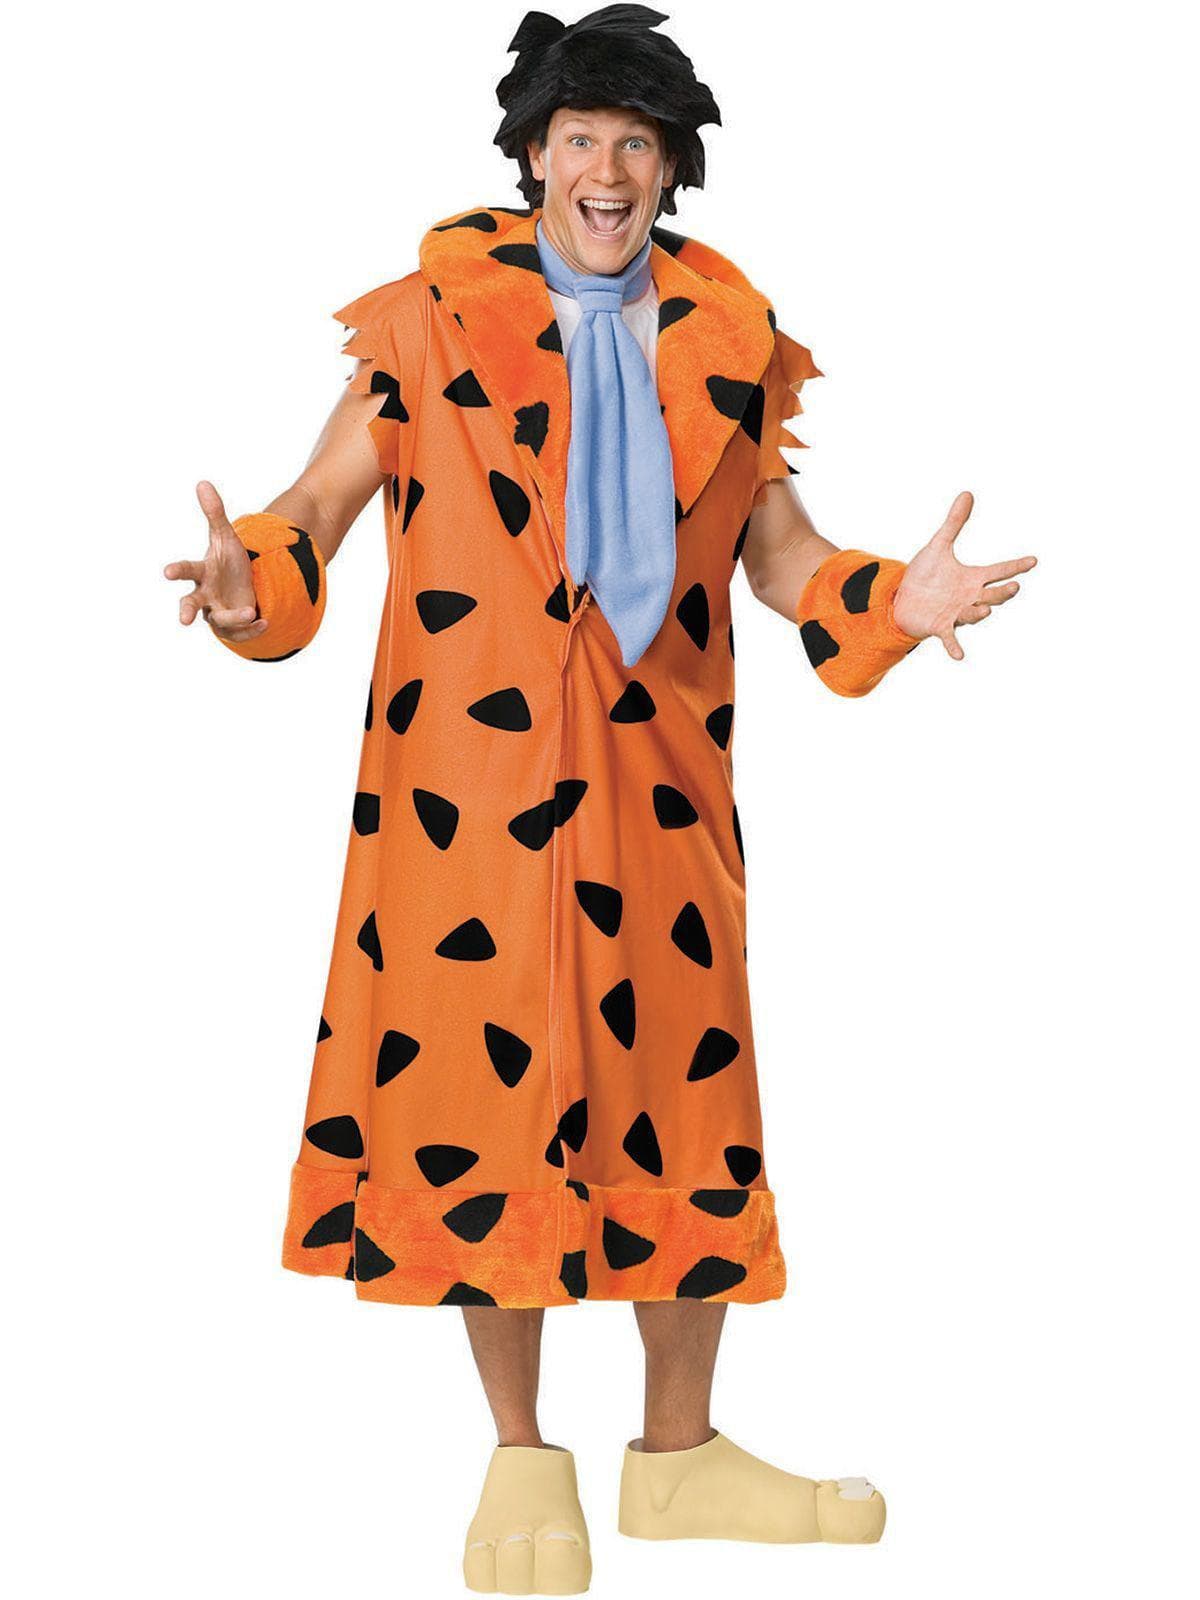 Men's Big and Tall Fred Flintstone Costume - Deluxe - costumes.com